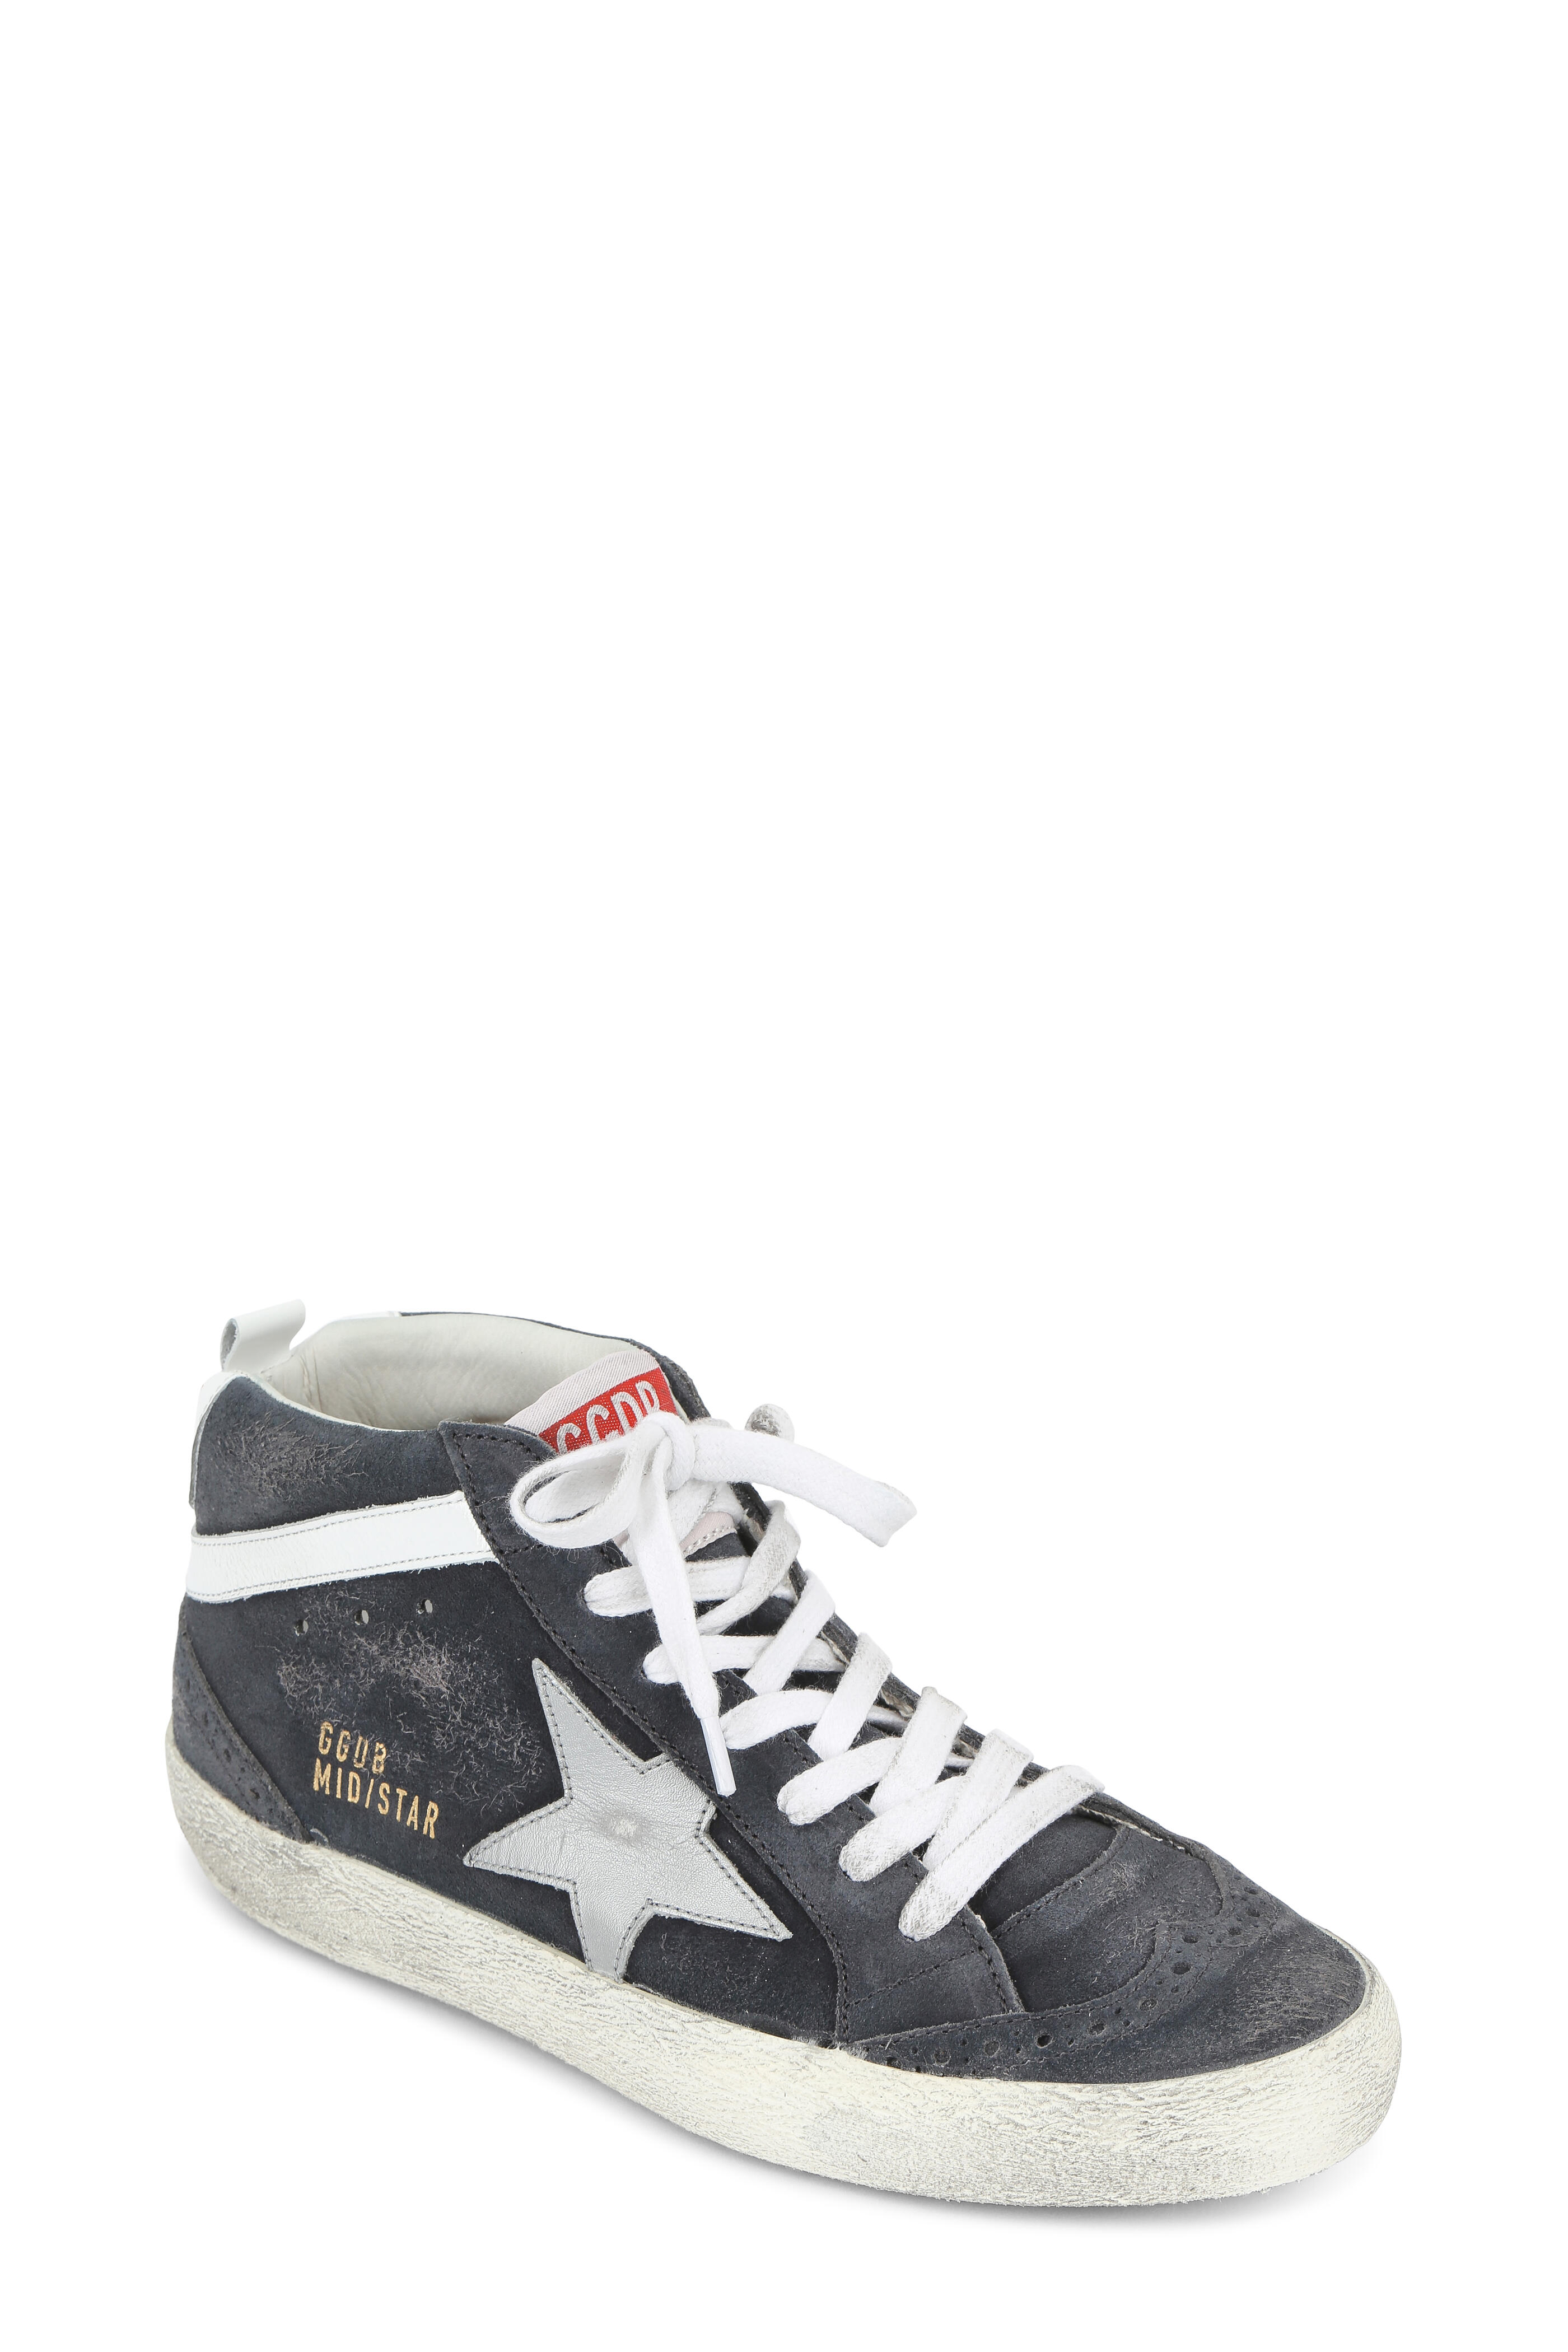 Golden Goose Women's Ball-Star Black Suede Low-top Sneaker | 8 M by Mitchell Stores